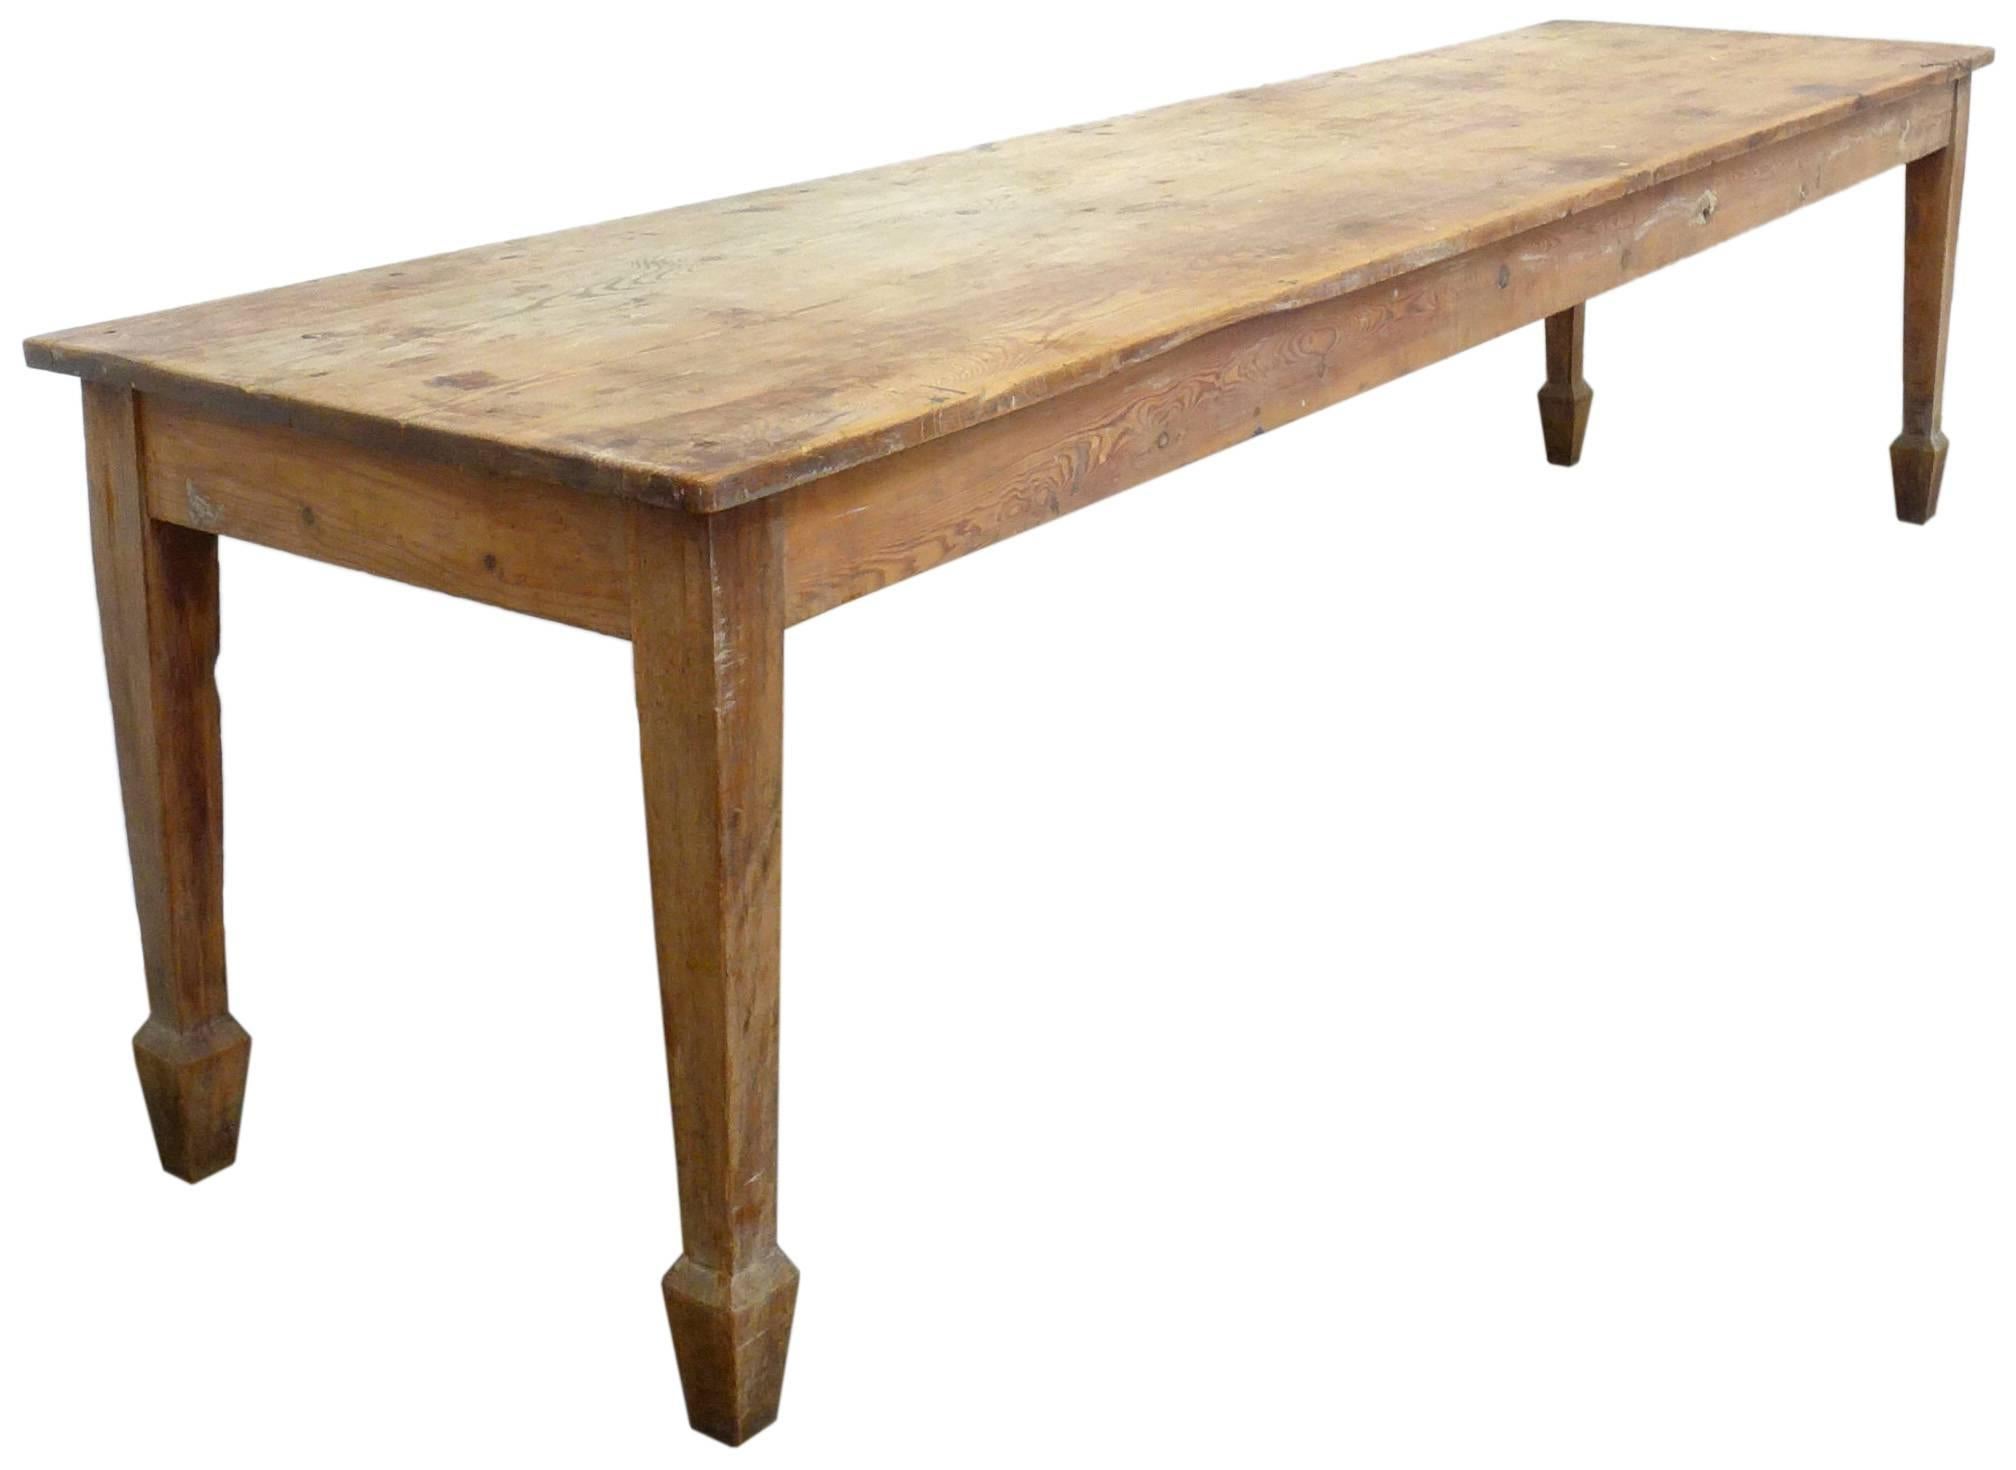 An extremely impressive and beautiful 19th century English farm table. Fantastic scale, form, patina and vibe; wonderful, carved and faceted leg details as well as dimensions that could easily accommodate ten dinner guests. An extremely elegant and